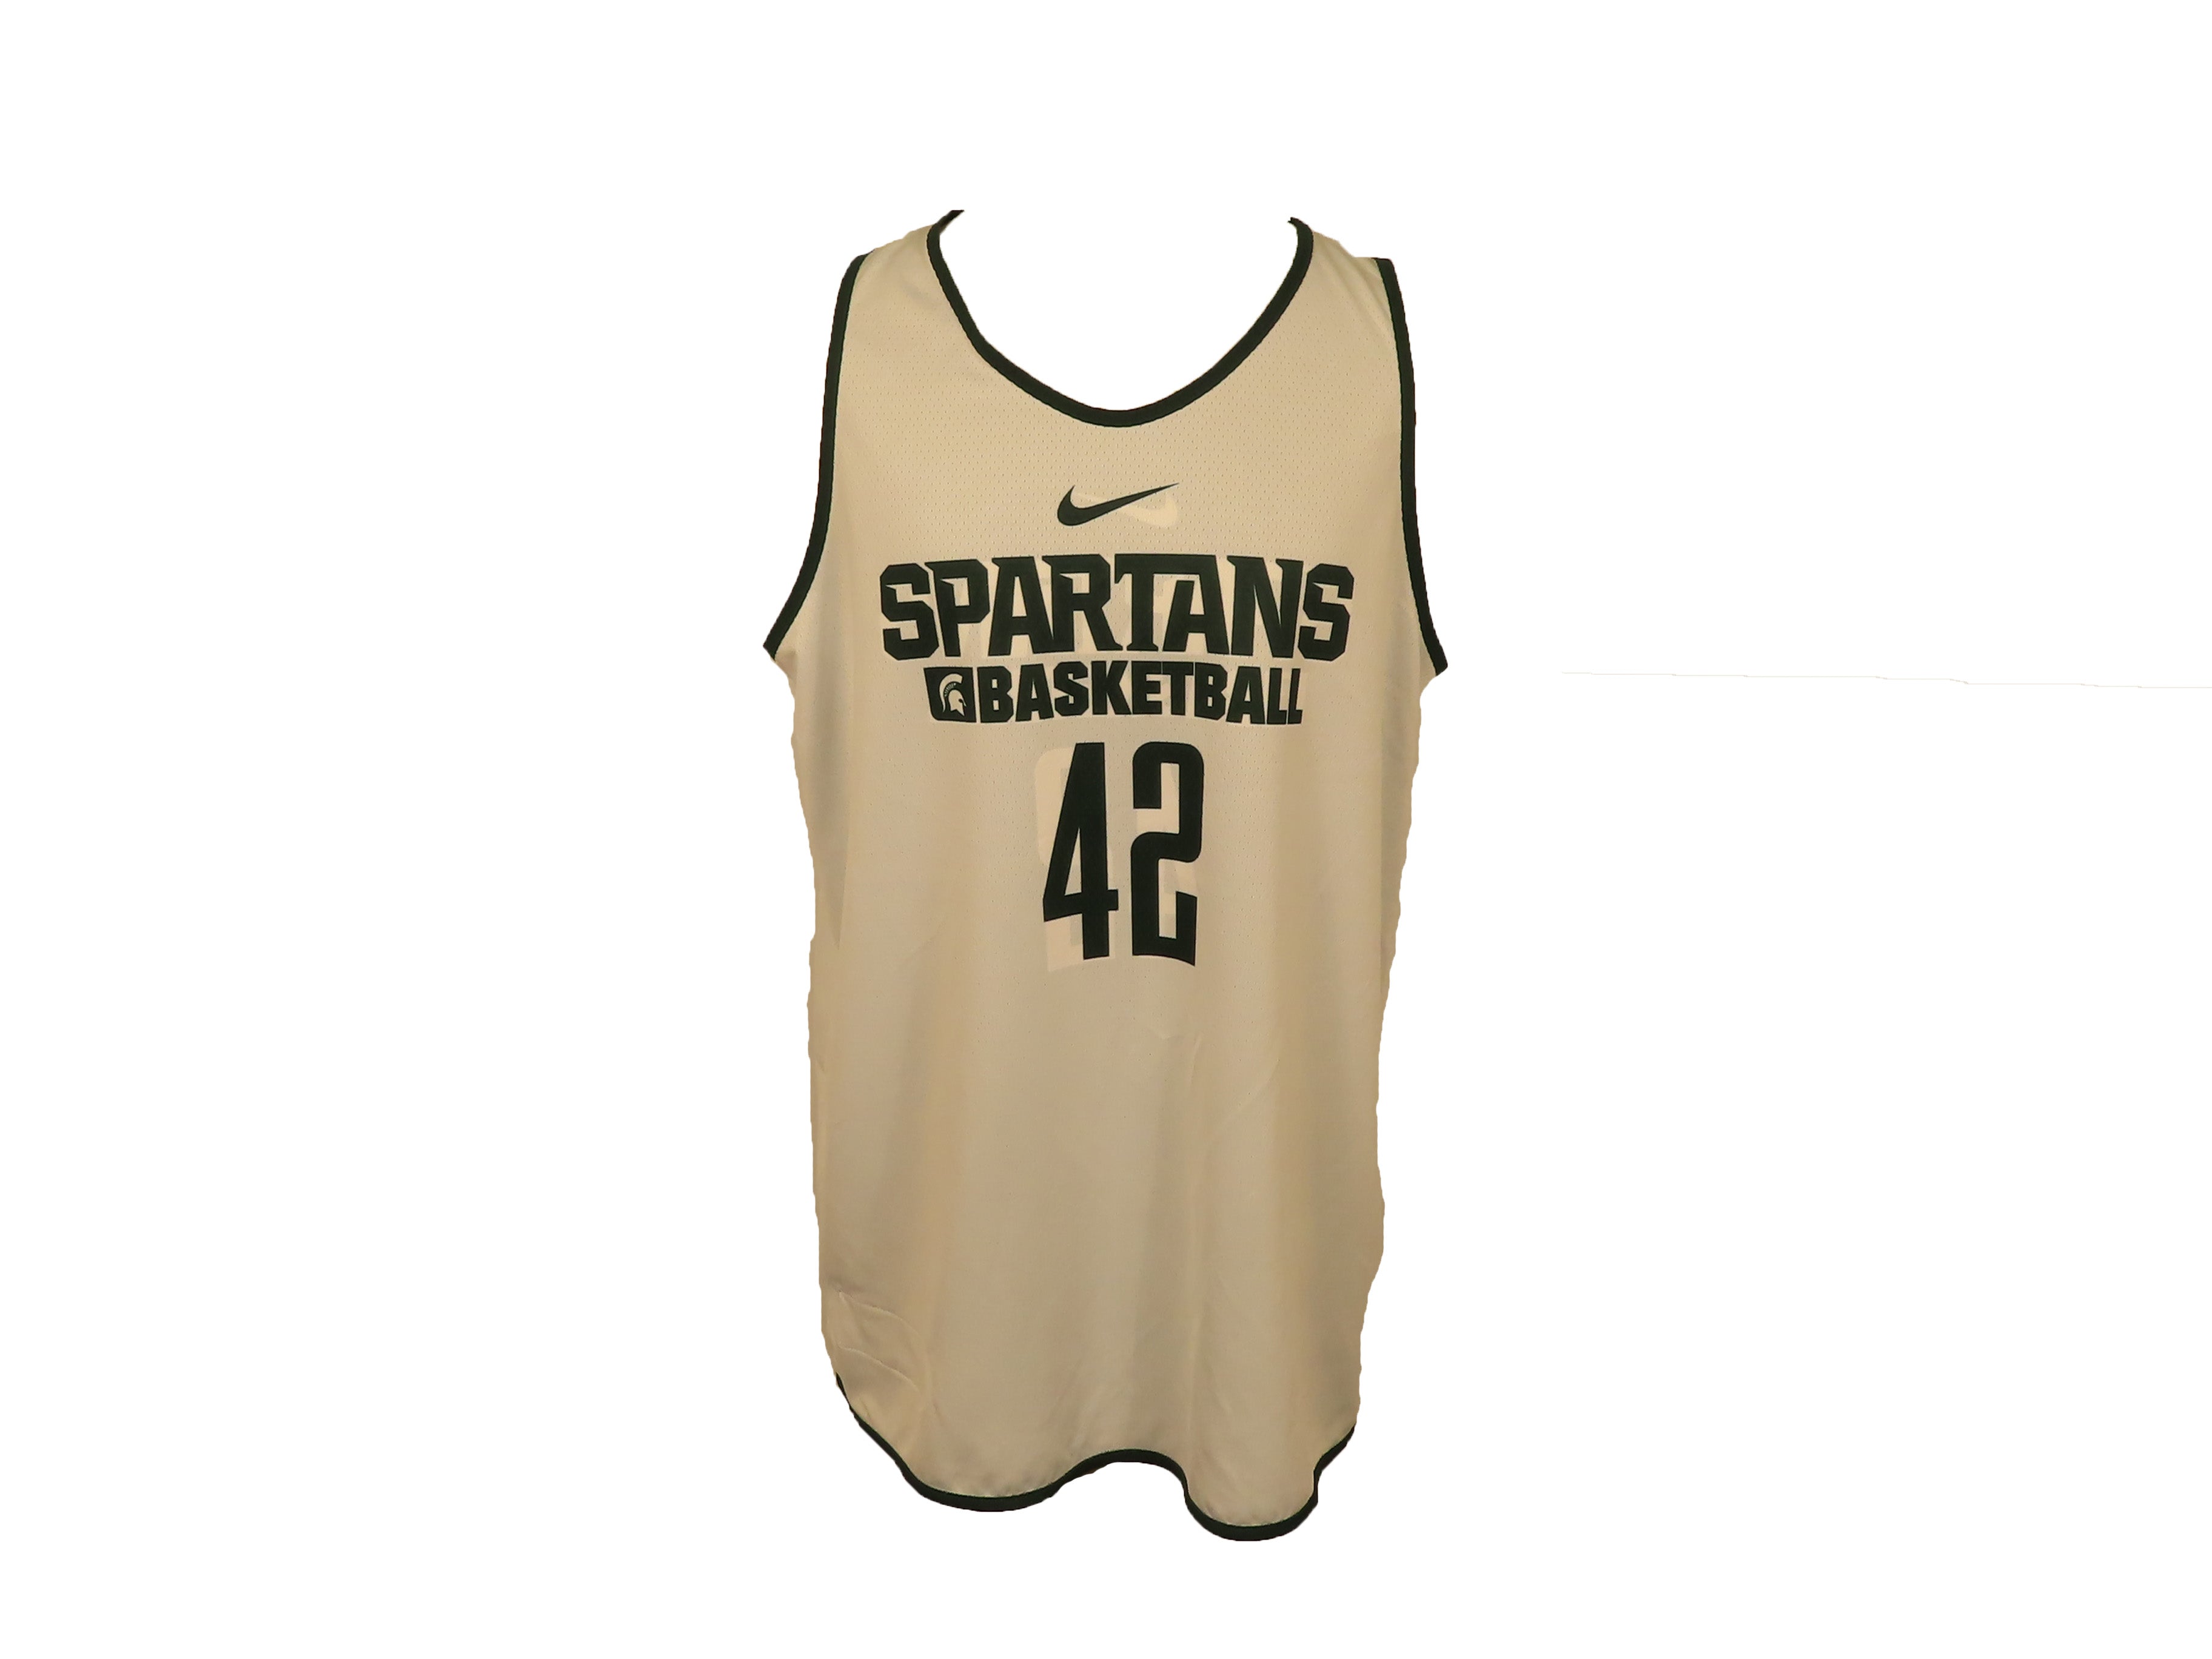 Spartans Basketball Jersey